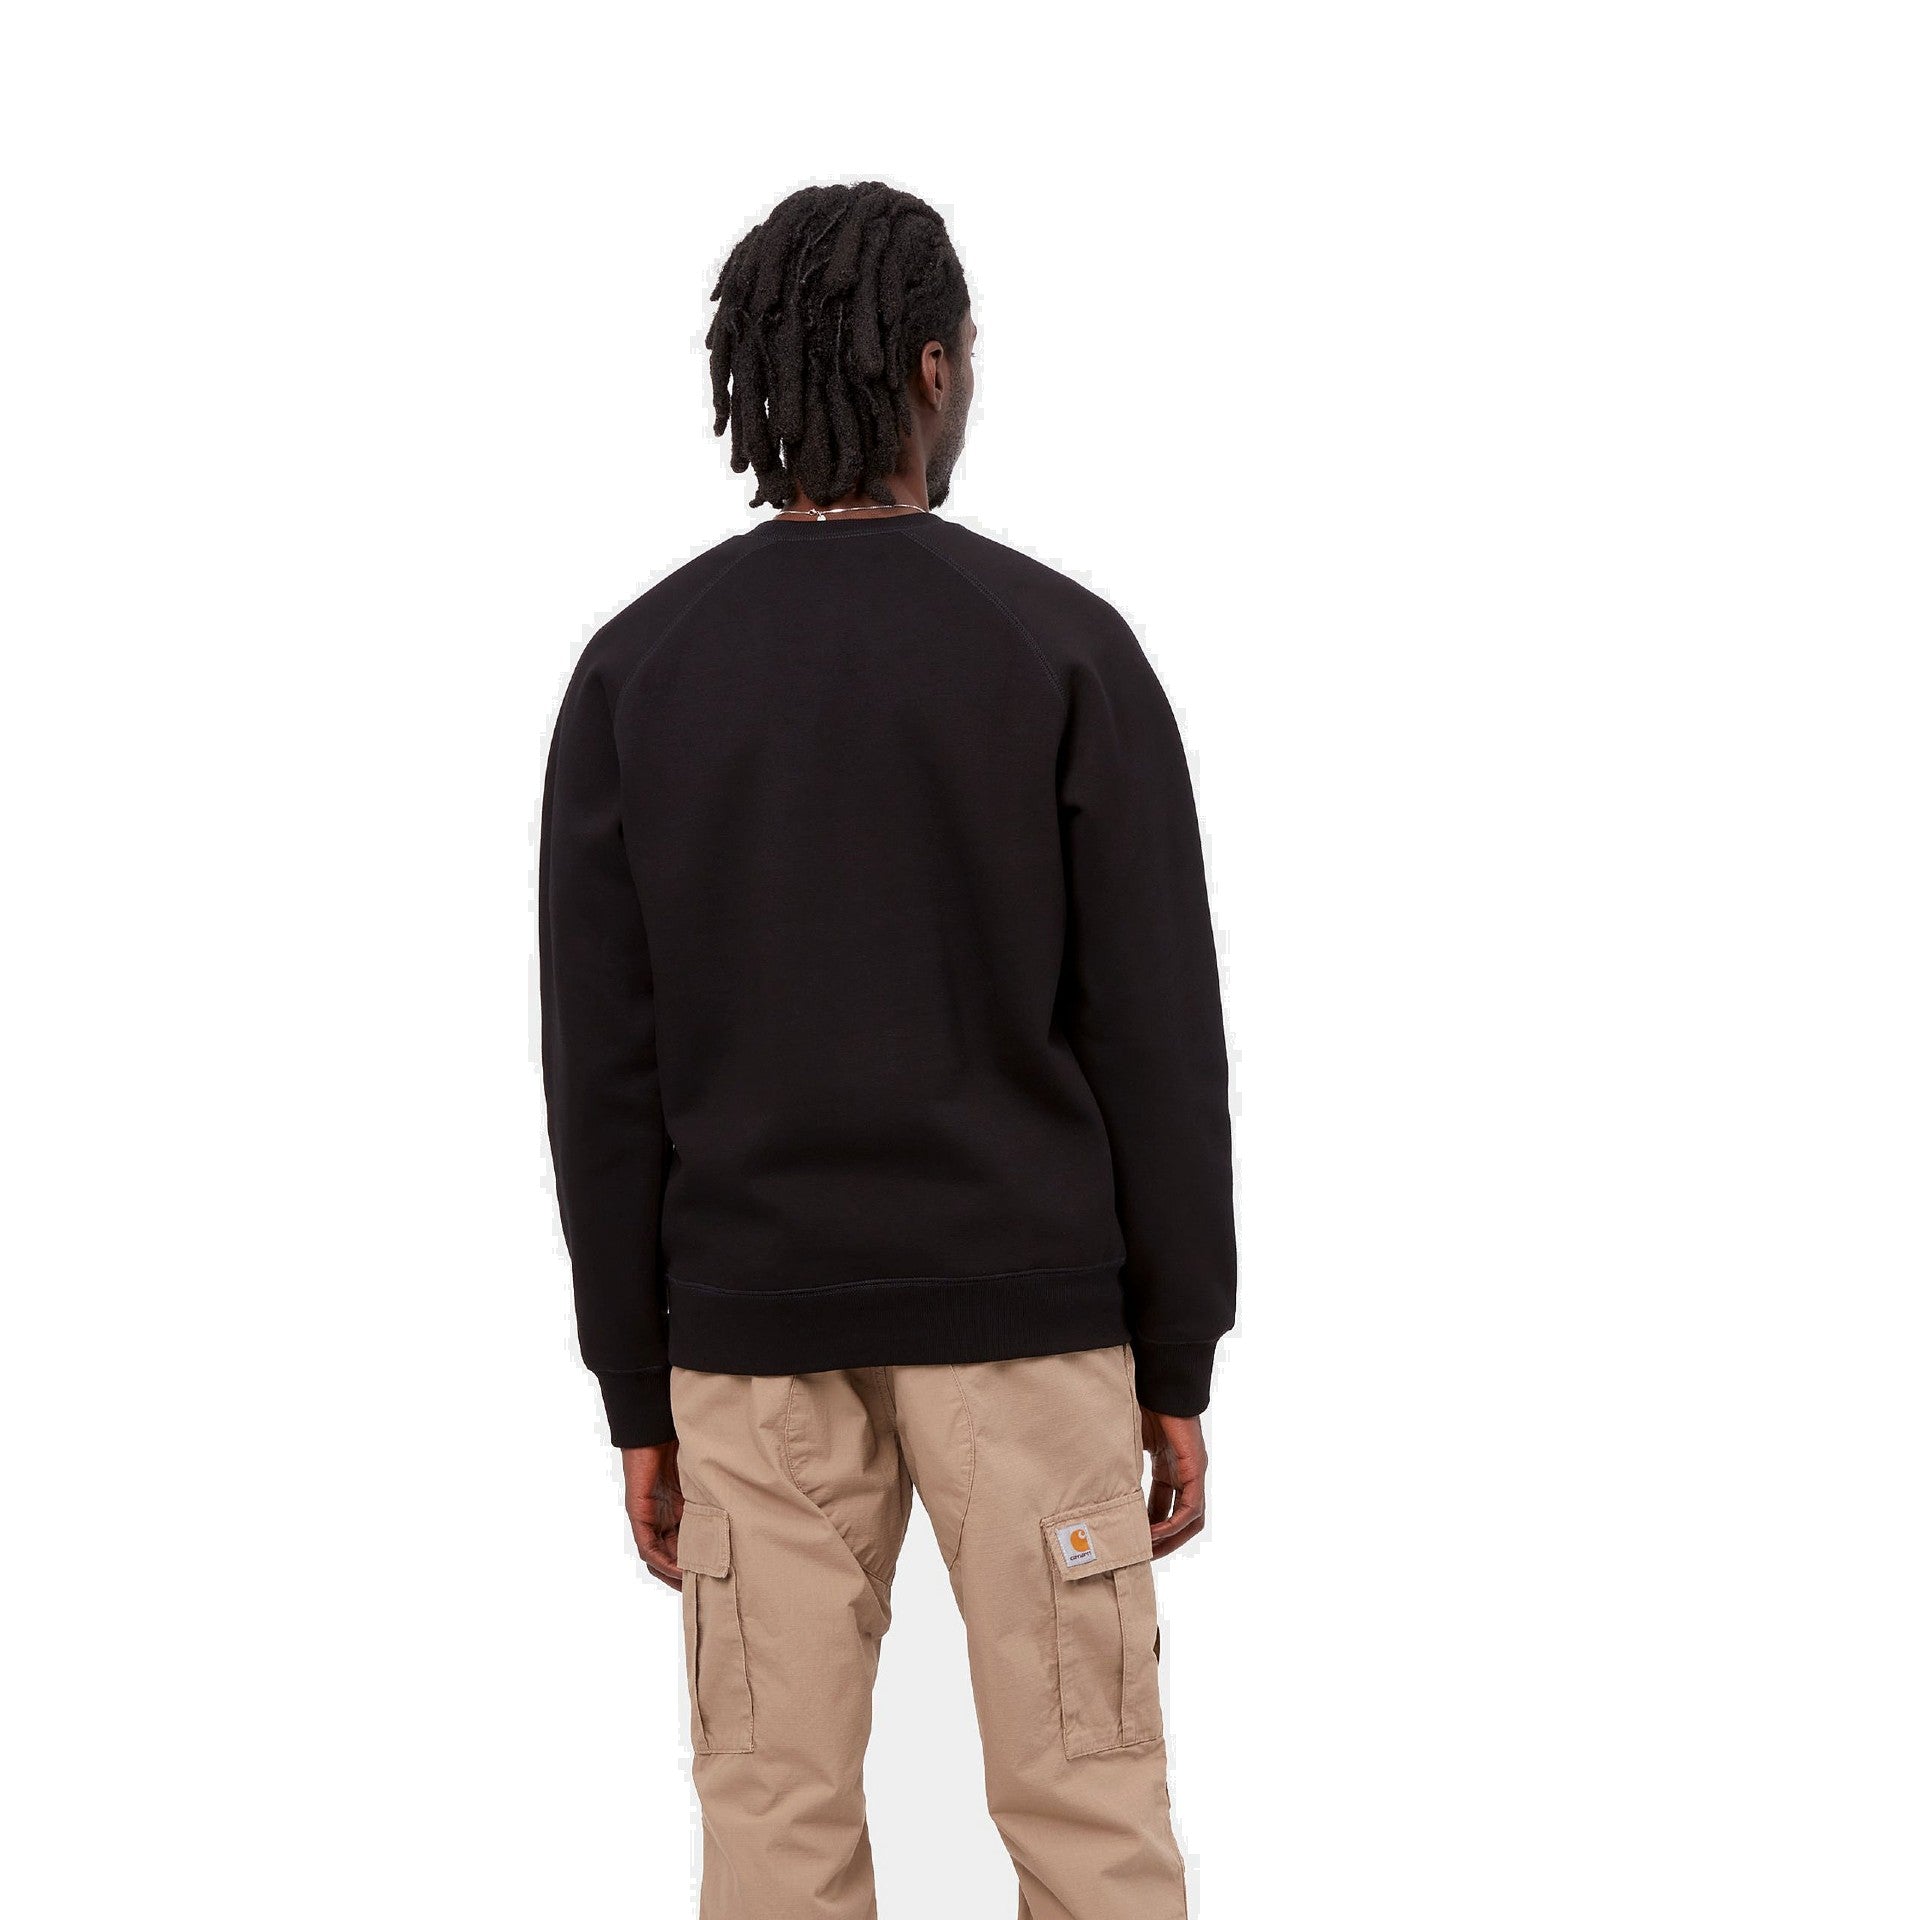 CARHARTT WIP CHASE SWEATER - BLACK/GOLD